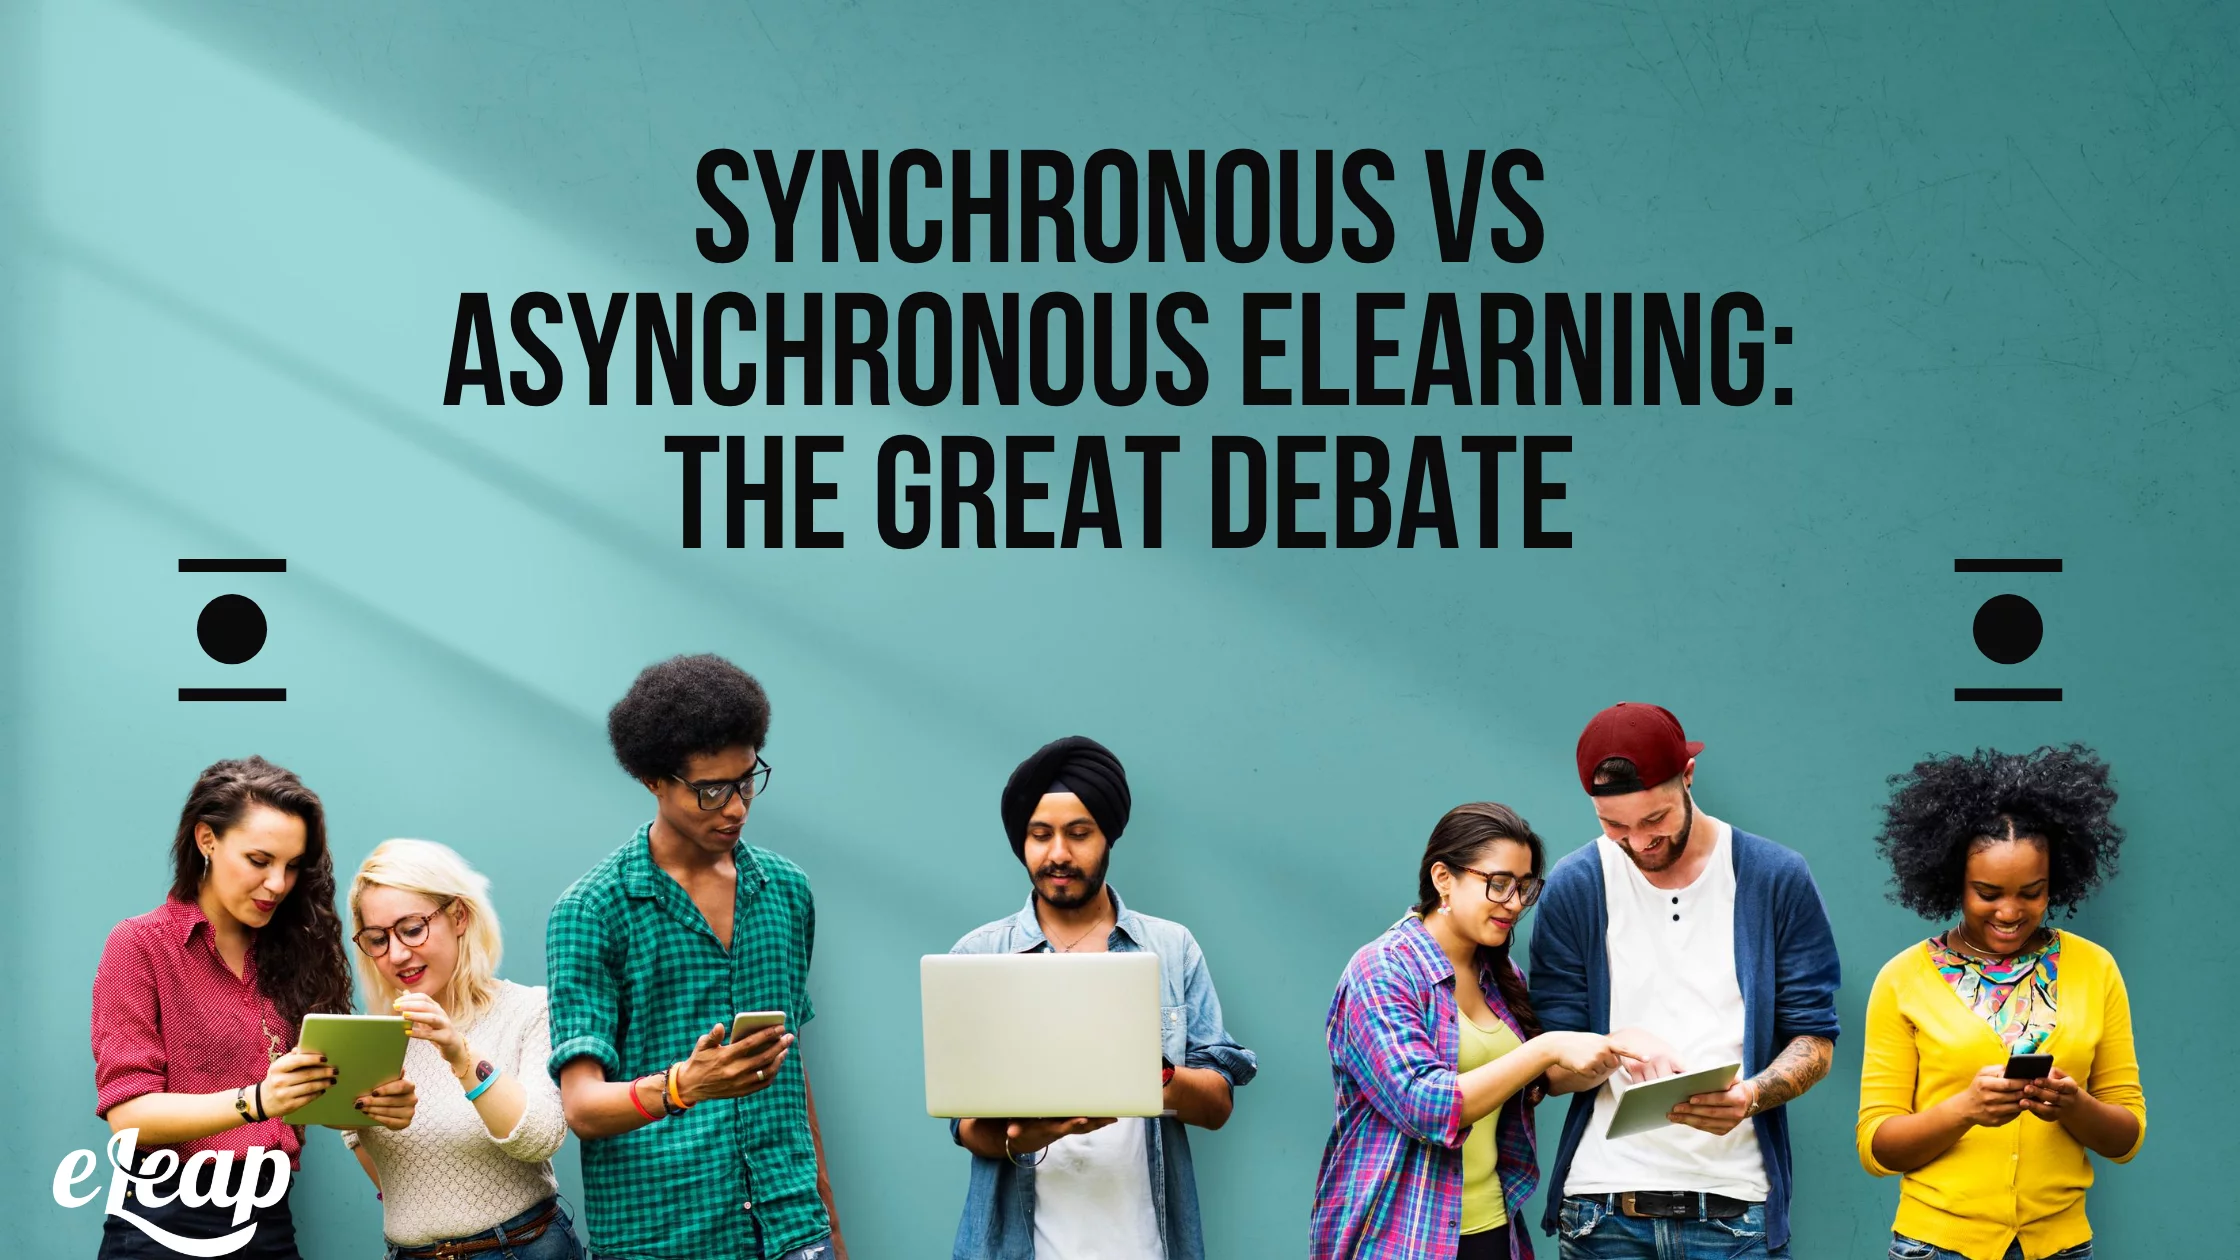 Synchronous vs Asynchronous eLearning The Great Debate